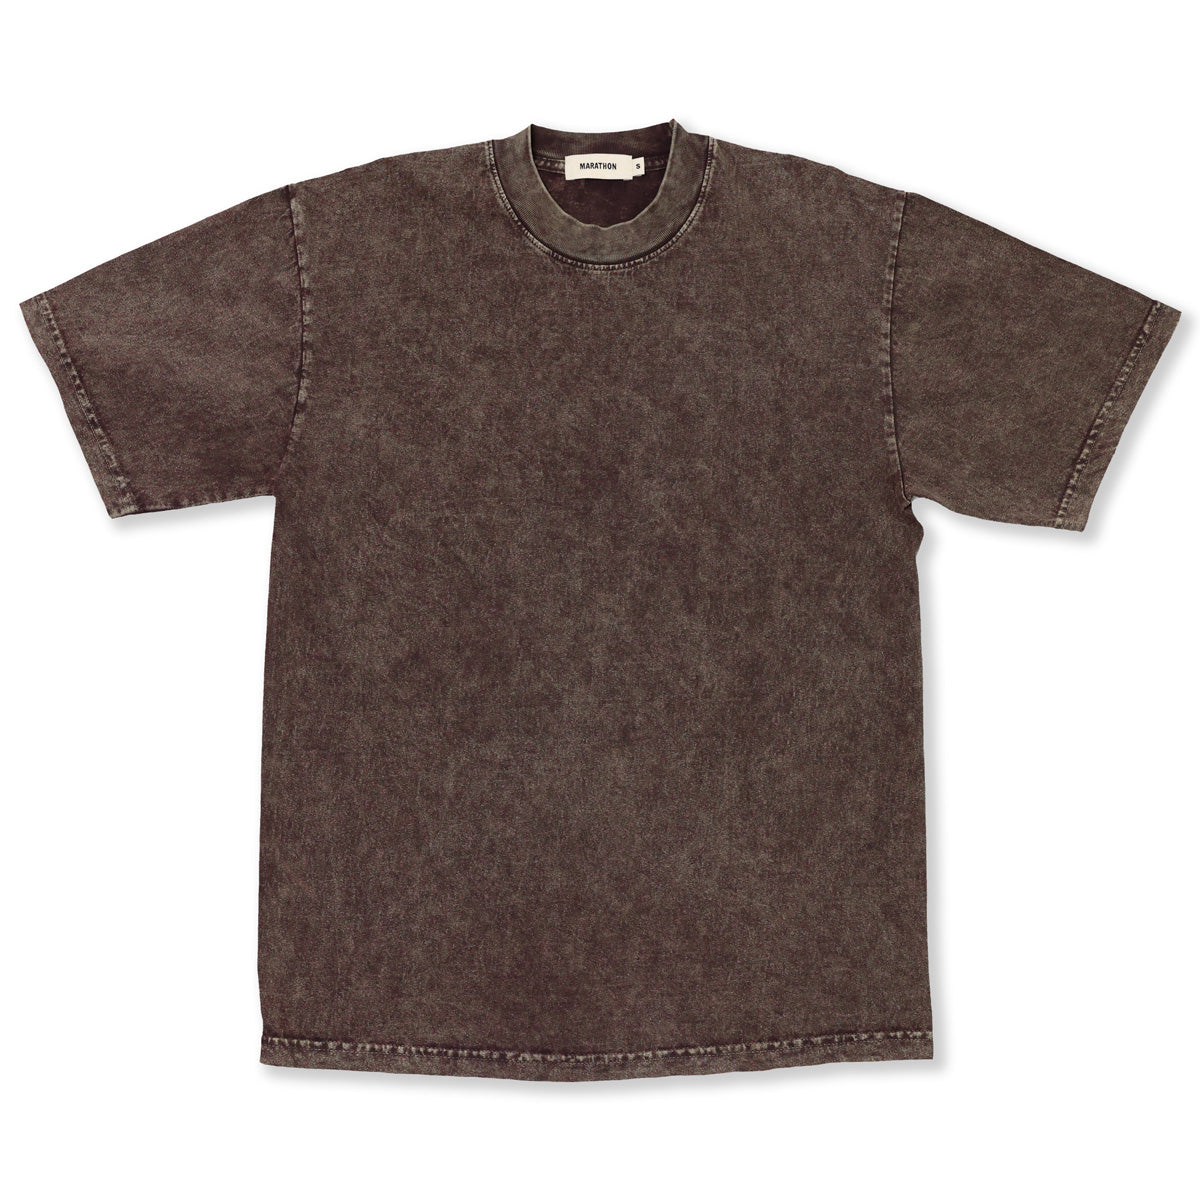 Marathon Ultra Leisure T-Shirt - Washed Cocoa - Front